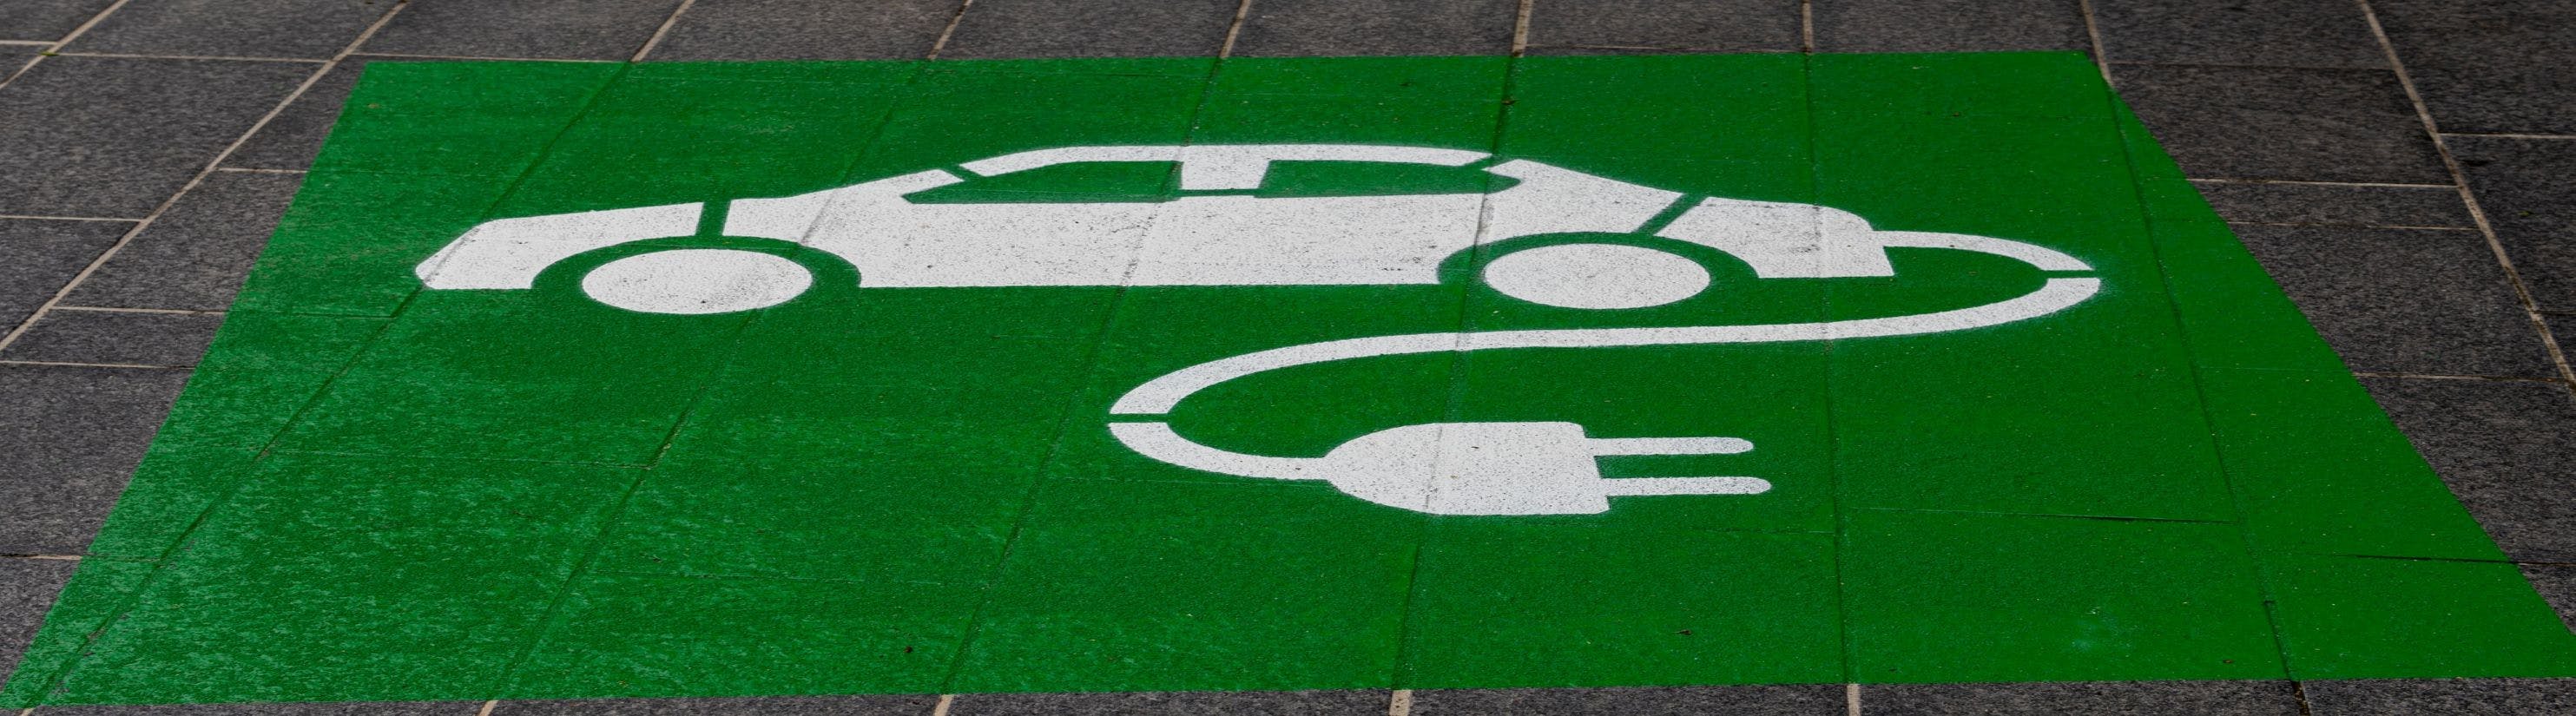 Photo of electric vehicle symbol painted onto road on green background.